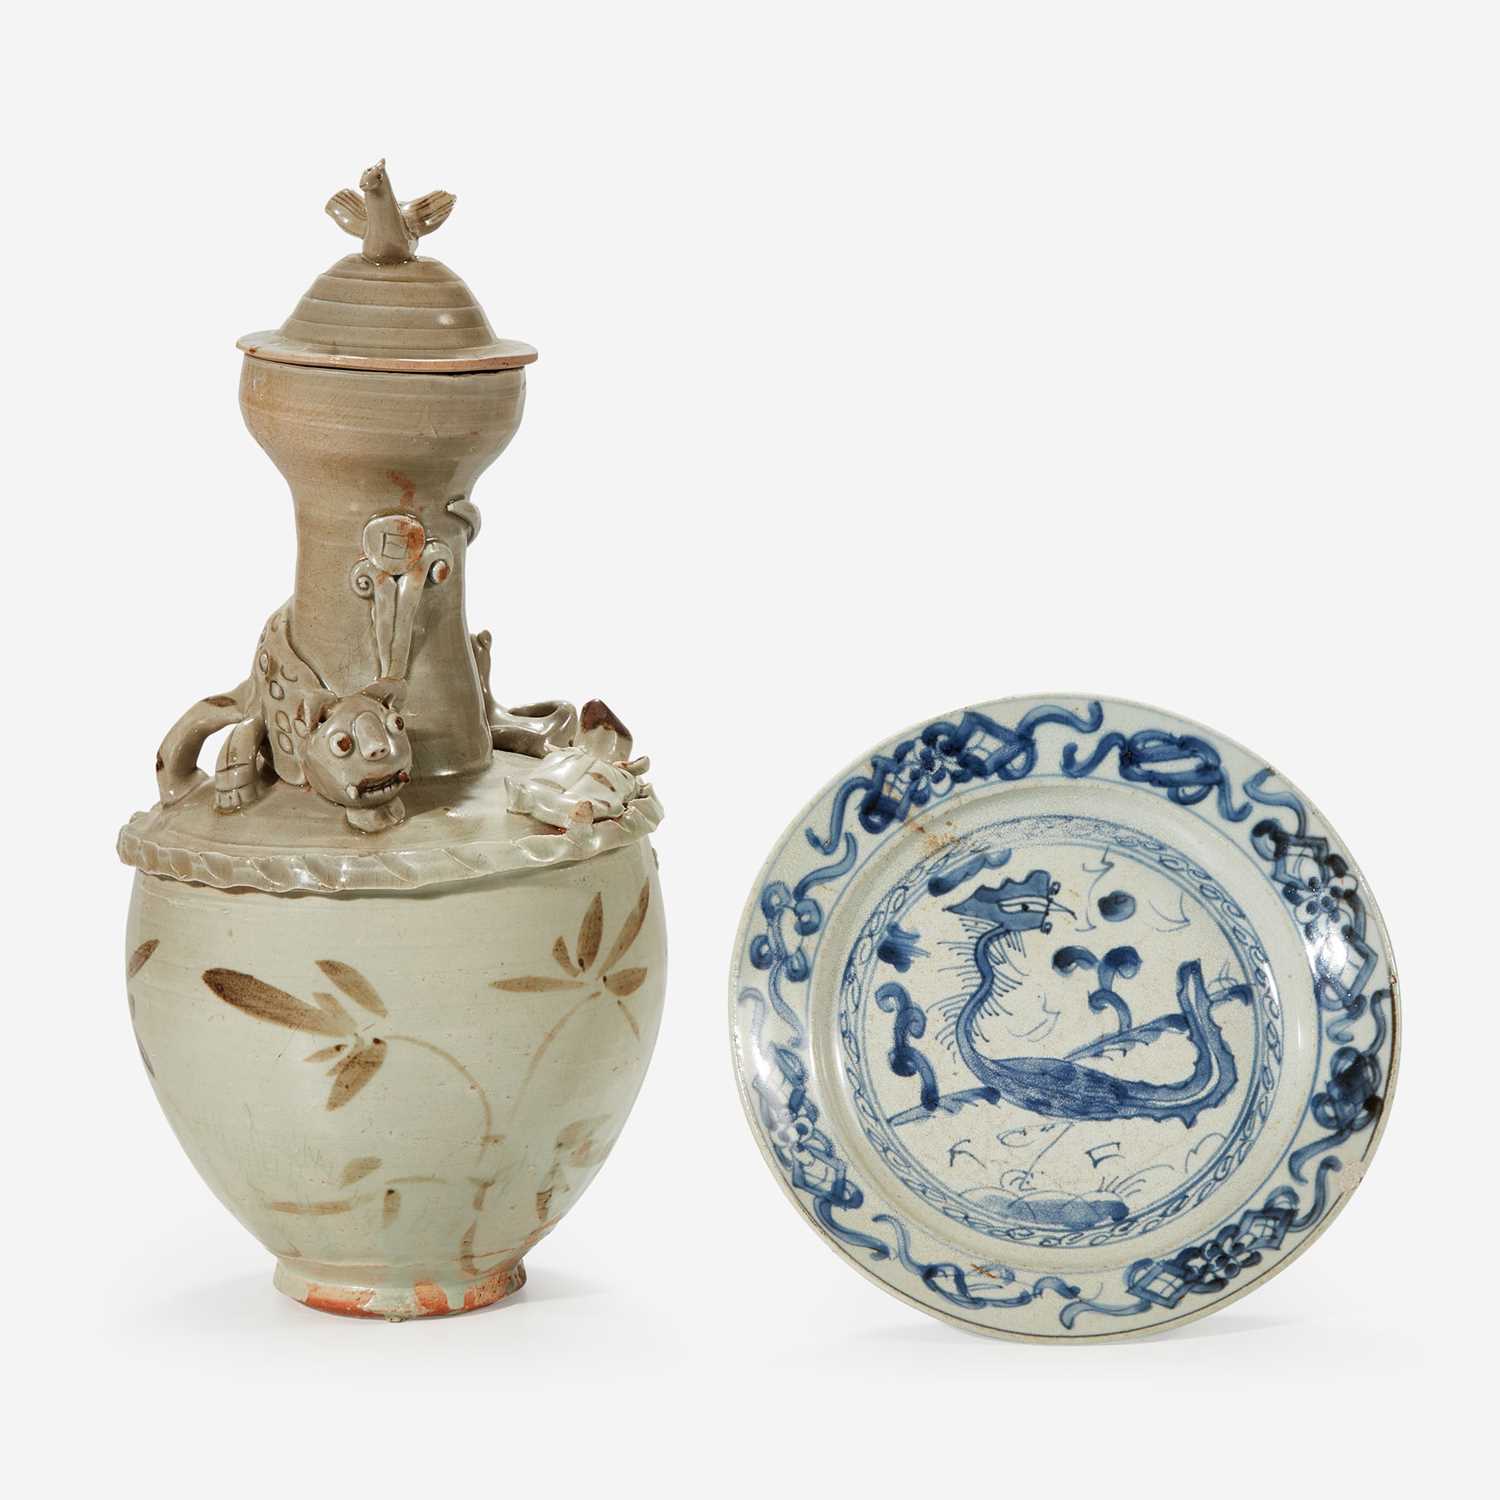 Lot 7 - A Chinese iron-brown decorated jar and cover and a blue and white "Phoenix" dish